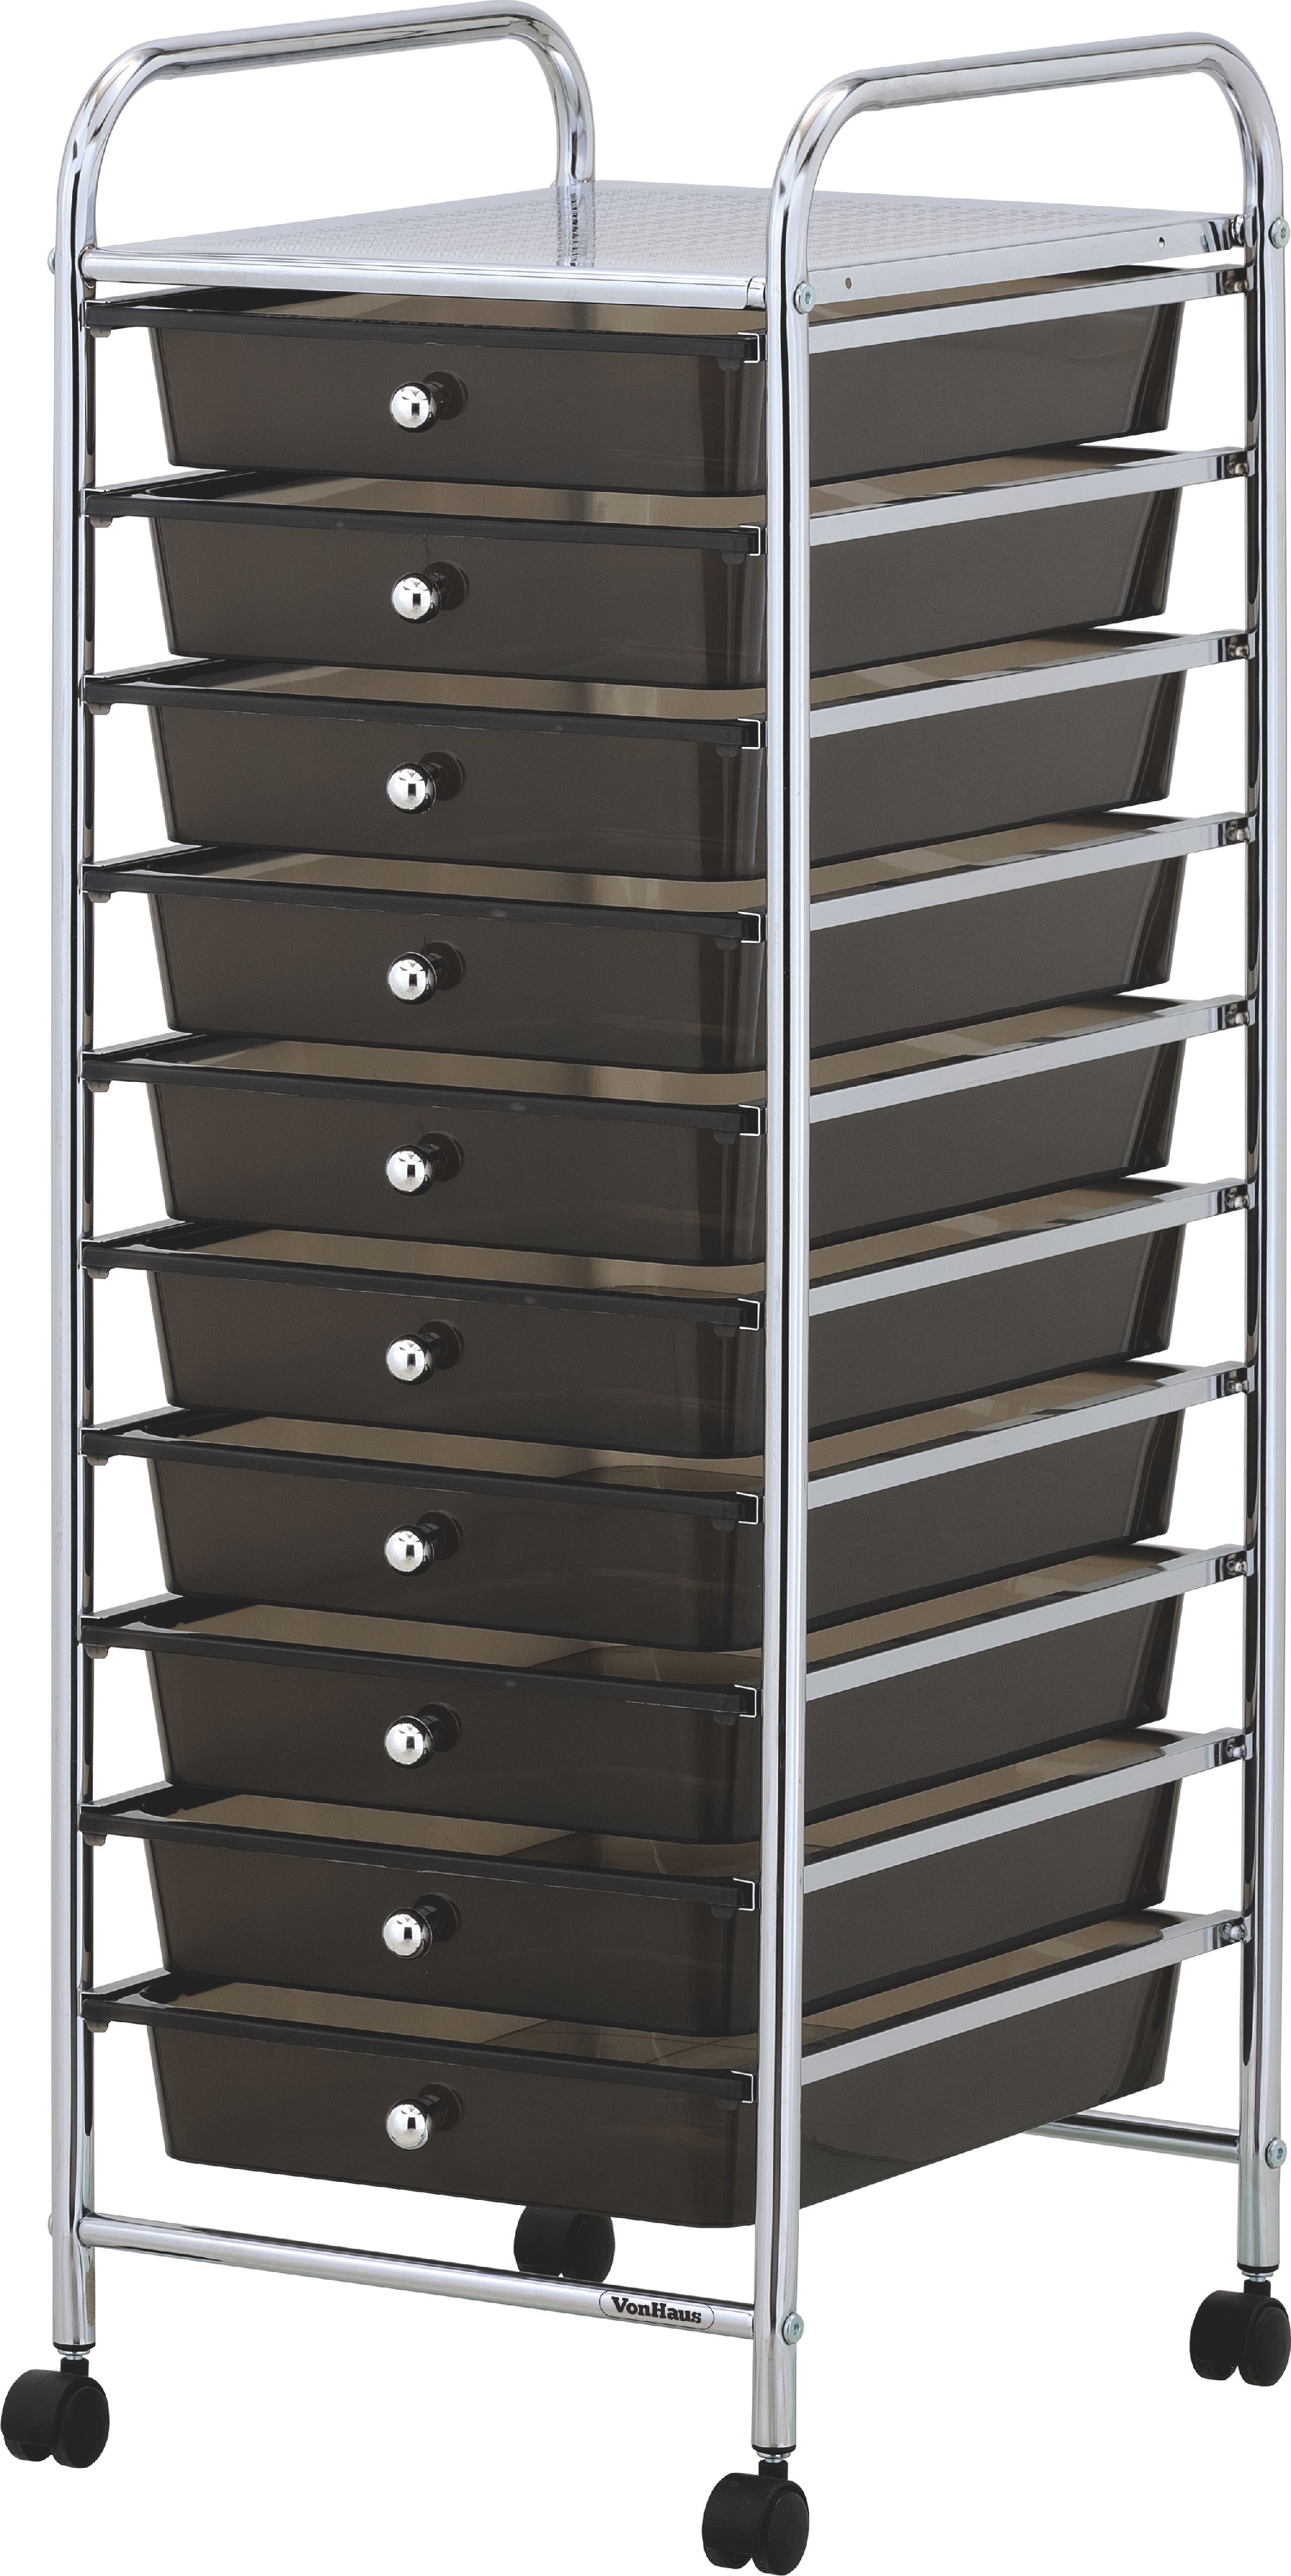 VonHaus 10 Drawer Mobile Storage Trolley for Home Office or Beauty Salon Black